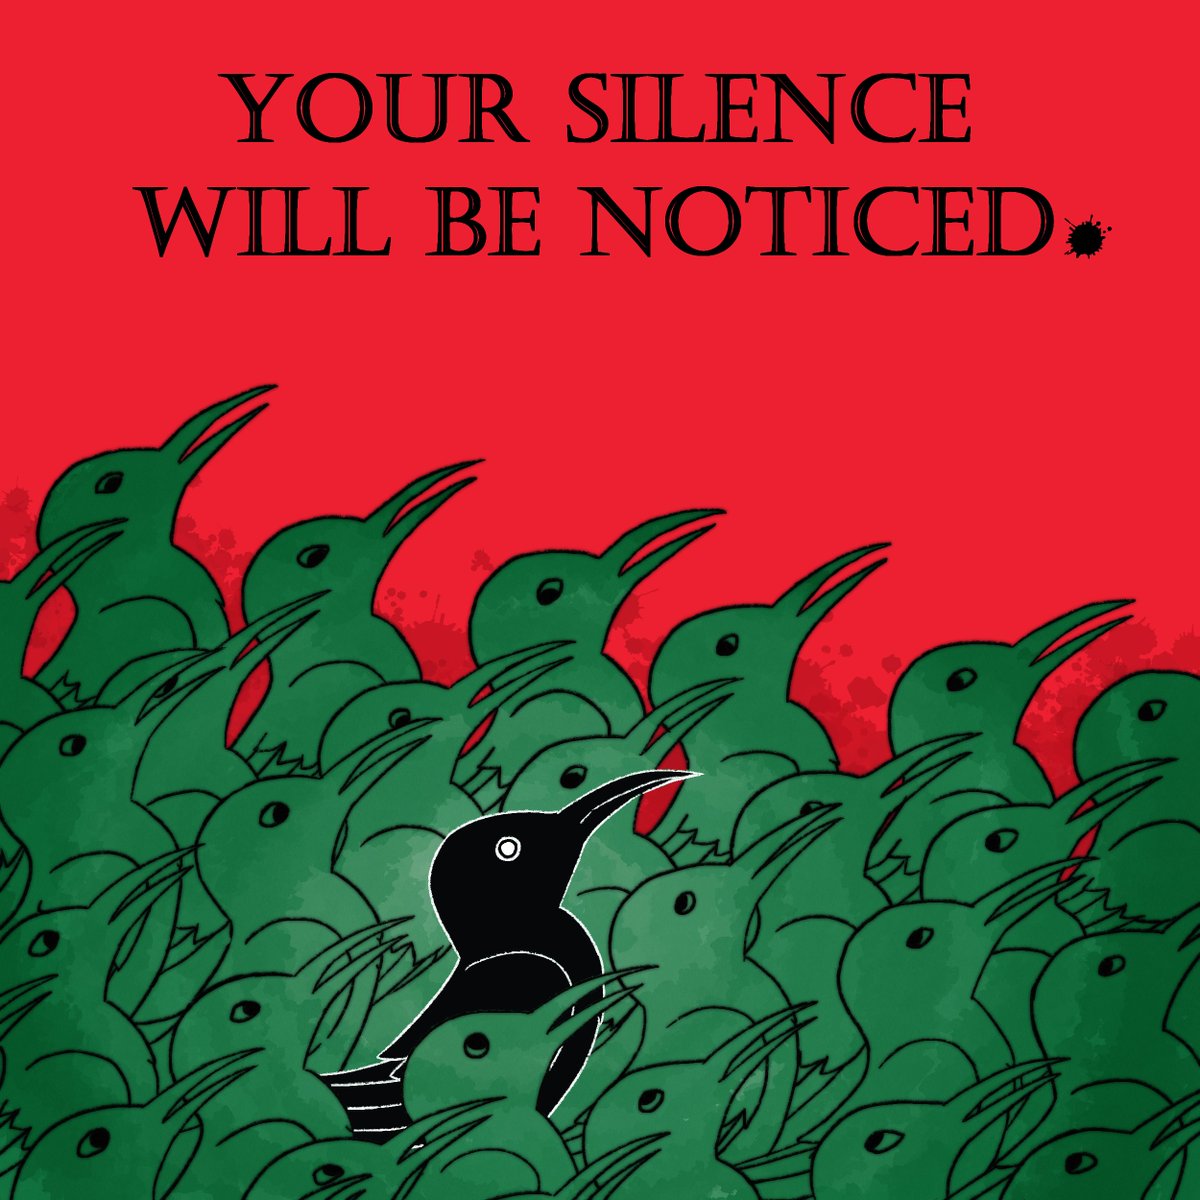 YOUR SILENCE WILL BE NOTICED. And whether you believe it or not, it is just as powerful as your voice. Do not let this die out. #CeasefireForGaza #CeasefireNOW #SupportPalestine #WeStandWithPalestine #FreePalaestine #FromtheRivertotheSeaPalestineWillbeFree #StopTheGenocide